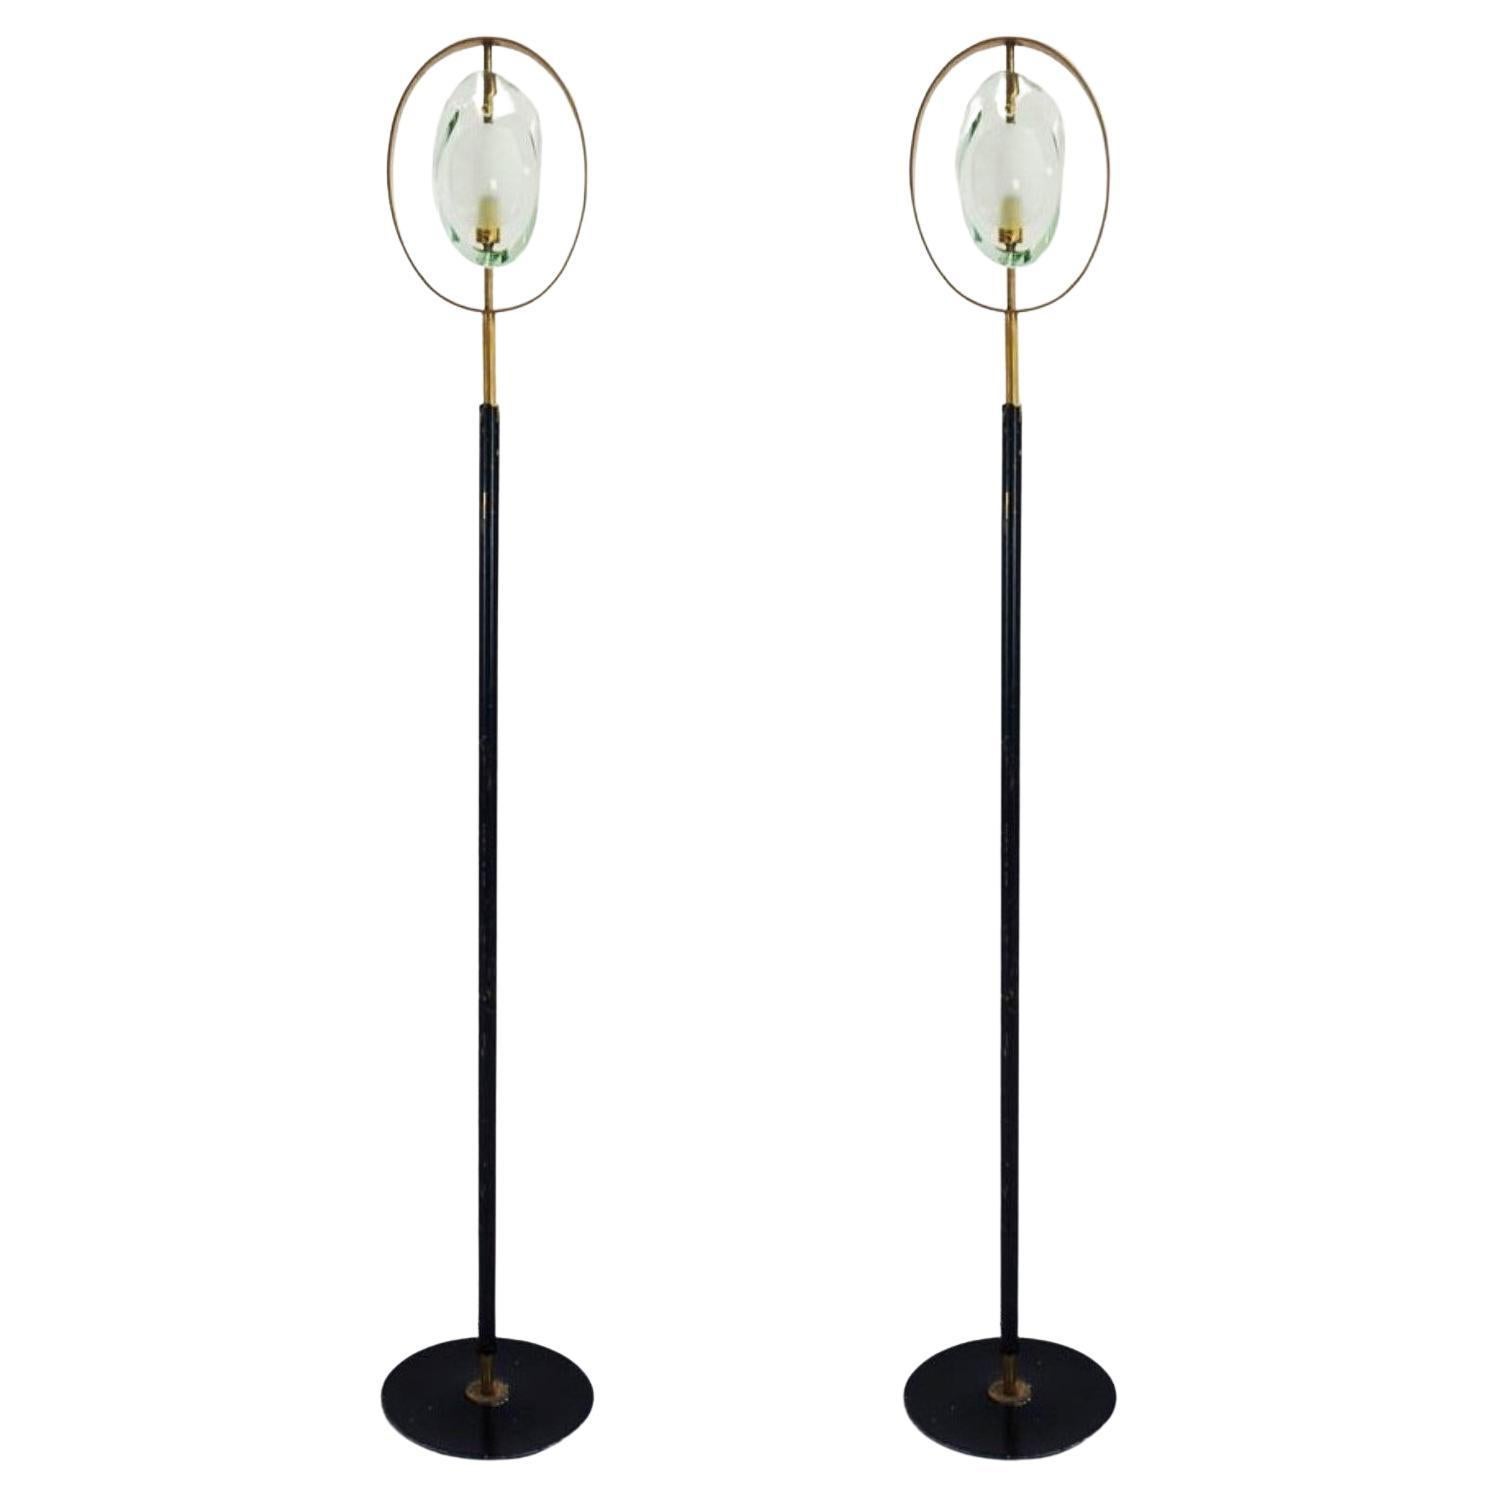 Pair of Max Ingrand Floor Lamps for Fontana Arte Model 2020, Italy, 1961 For Sale